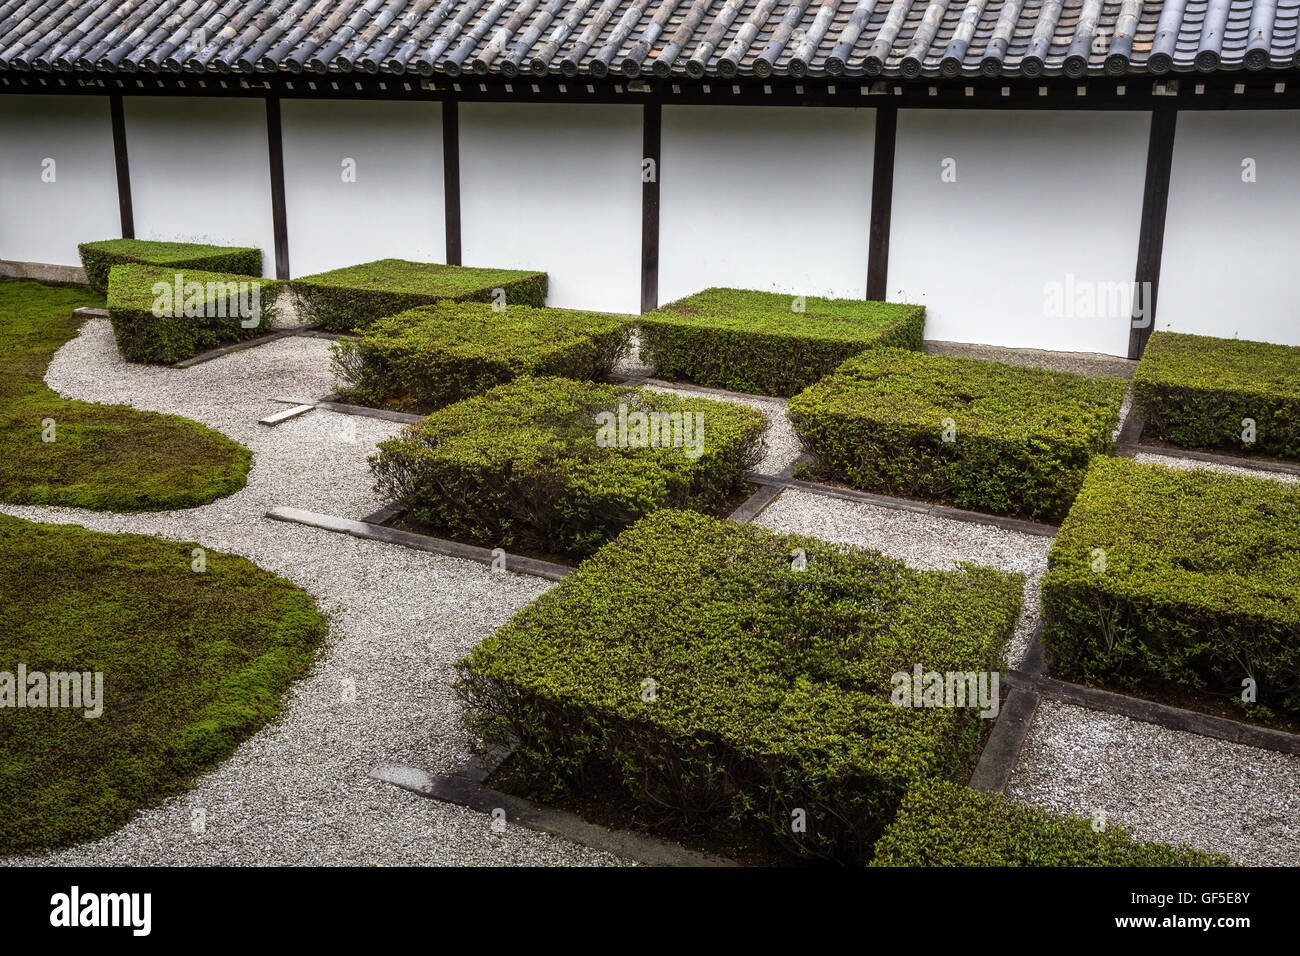 Tofukuji West Garden has a gentle style composed of moss and azalea shrubs trimmed in a checkered pattern Stock Photo